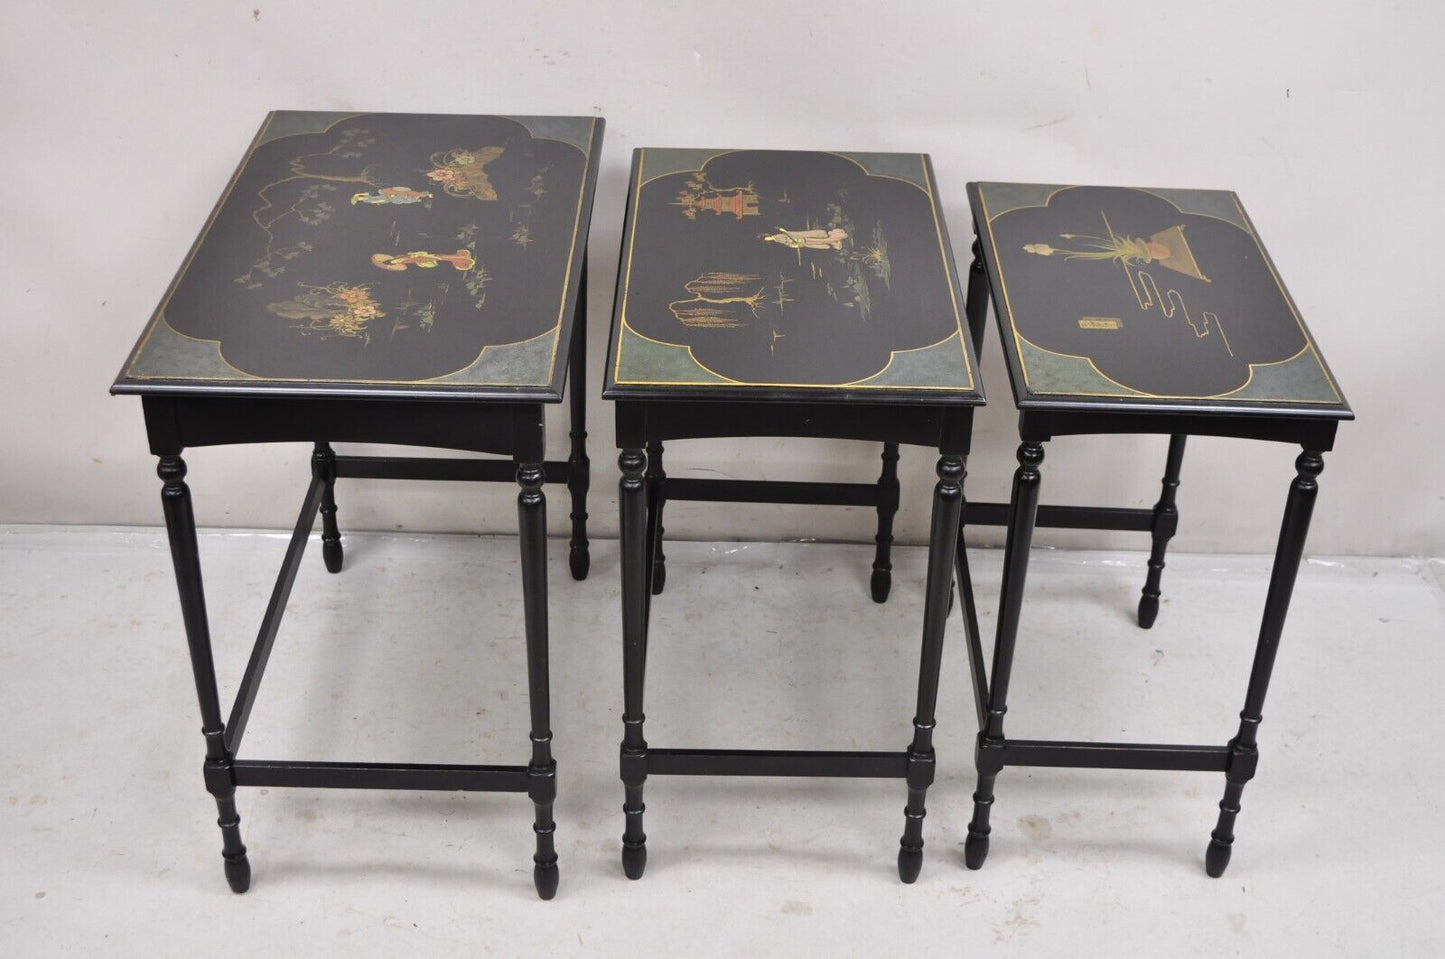 Vtg Chinoiserie Asian Inspired Black Nesting Side Tables by Paalman - Set of 3